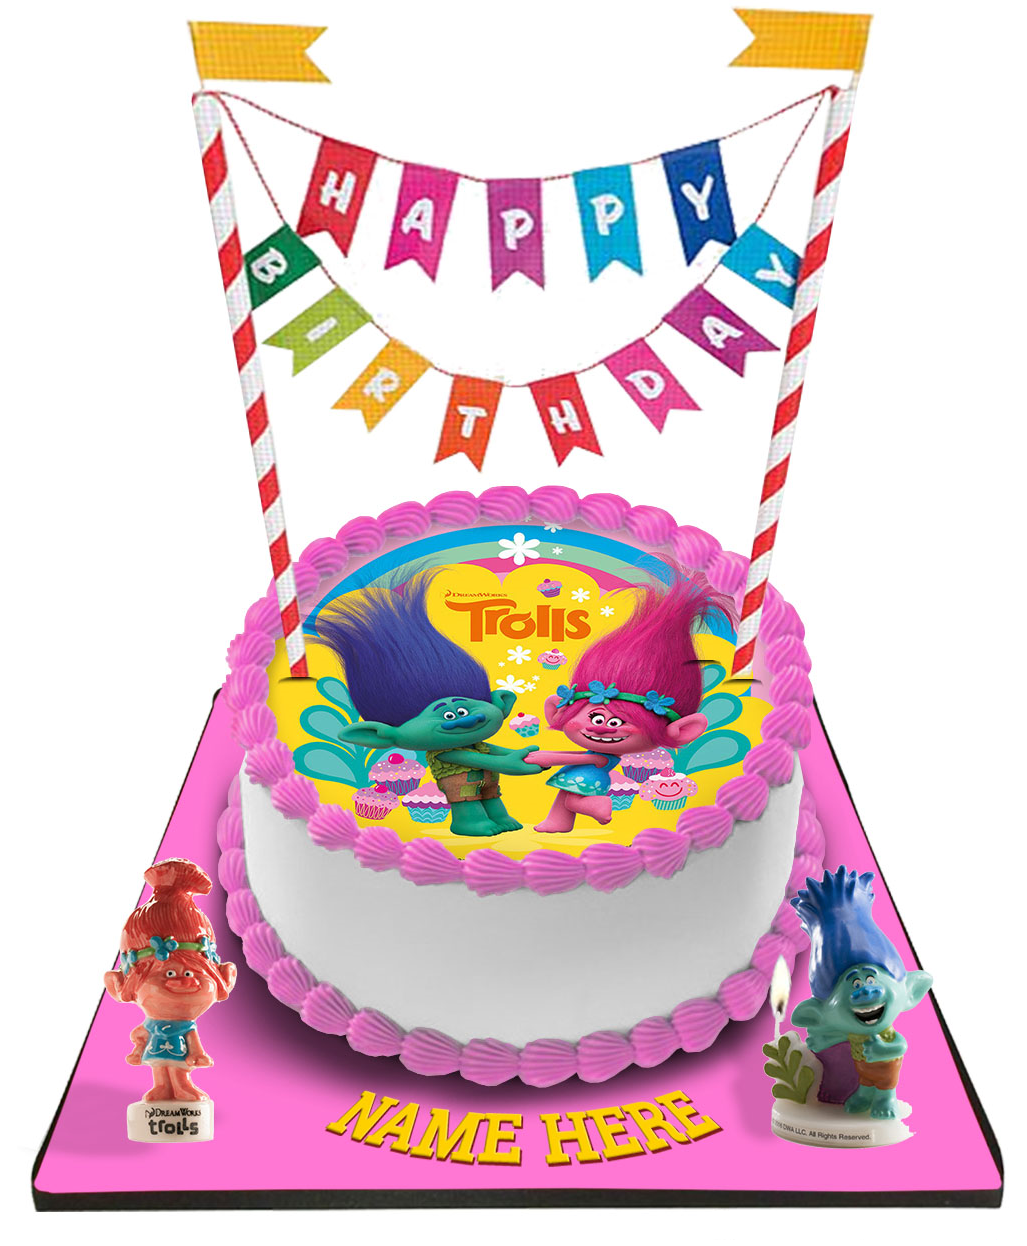 Trolls Cake with Happy Birthday Bunting & Topper